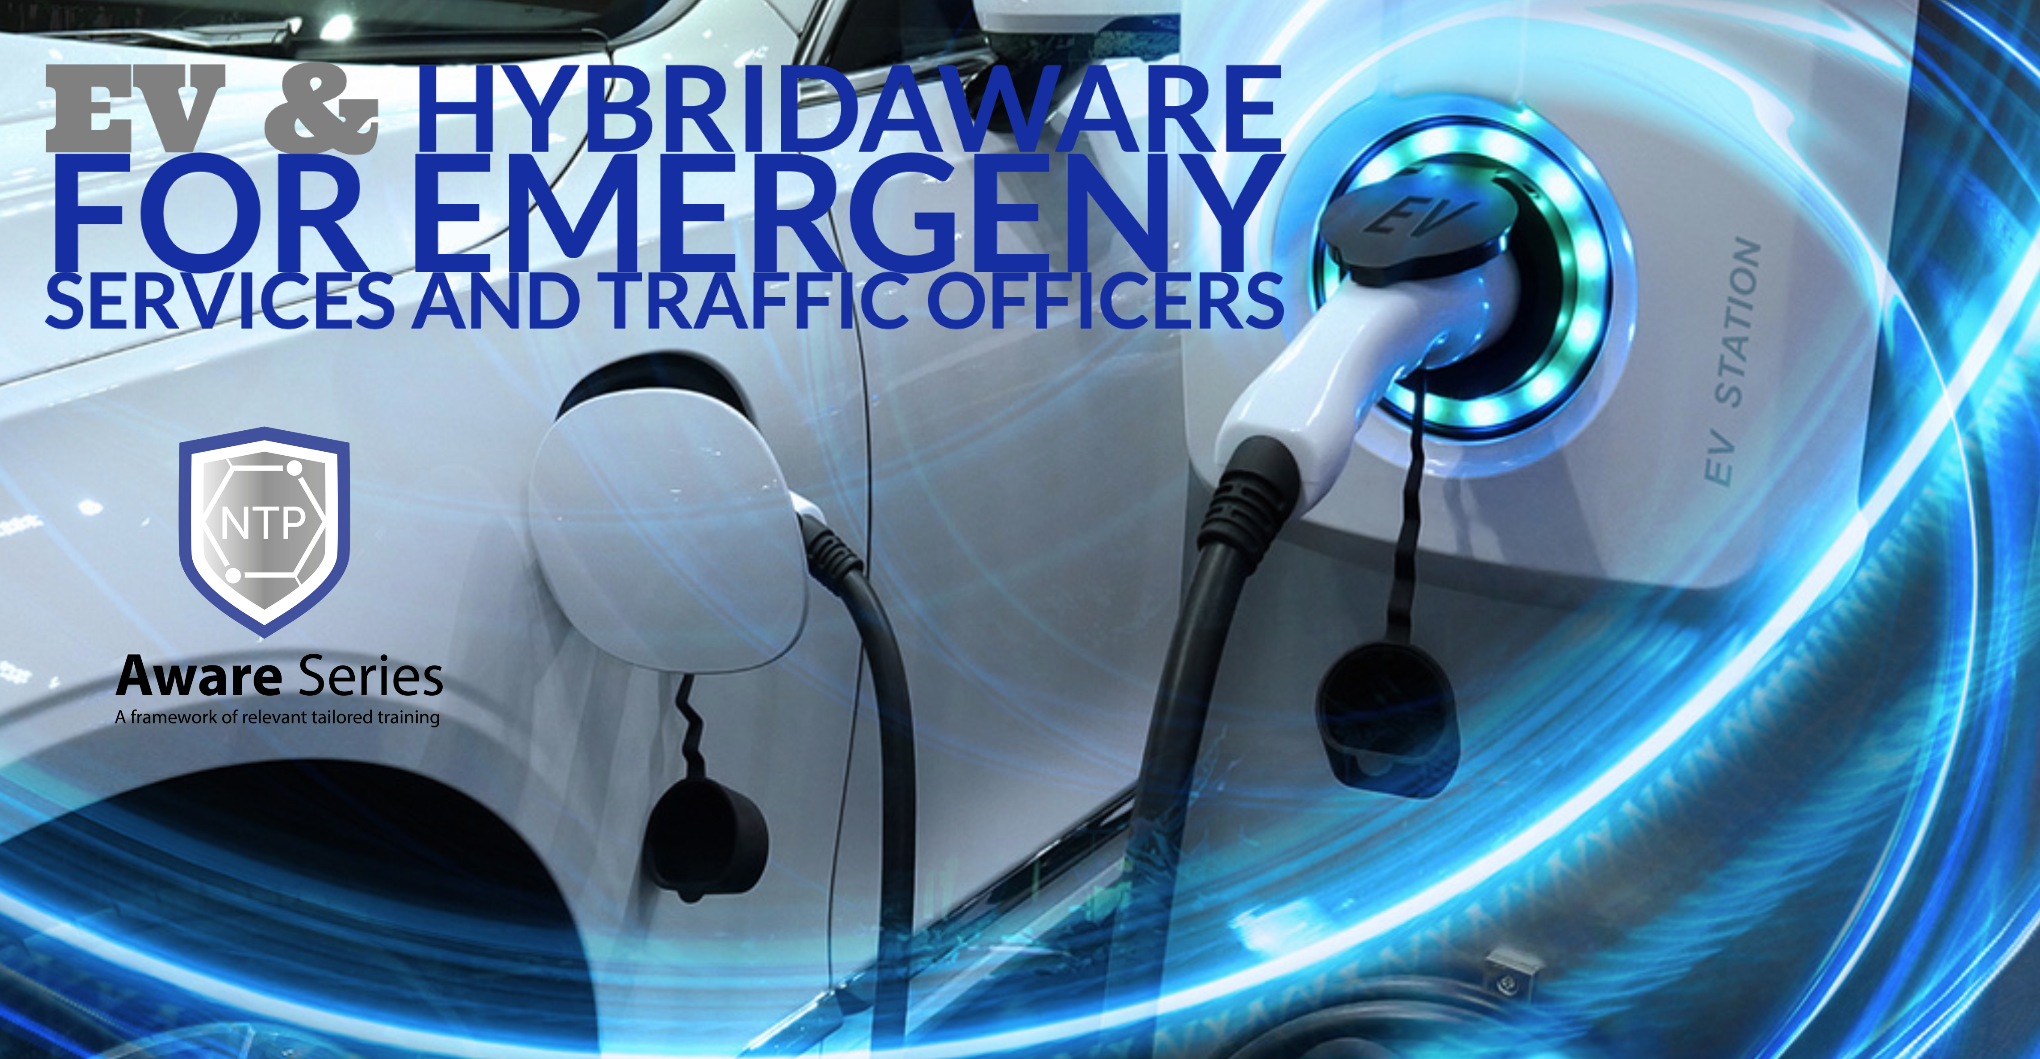 Generic Emergency Services and Traffic Officers' EV and HybridAWARE course